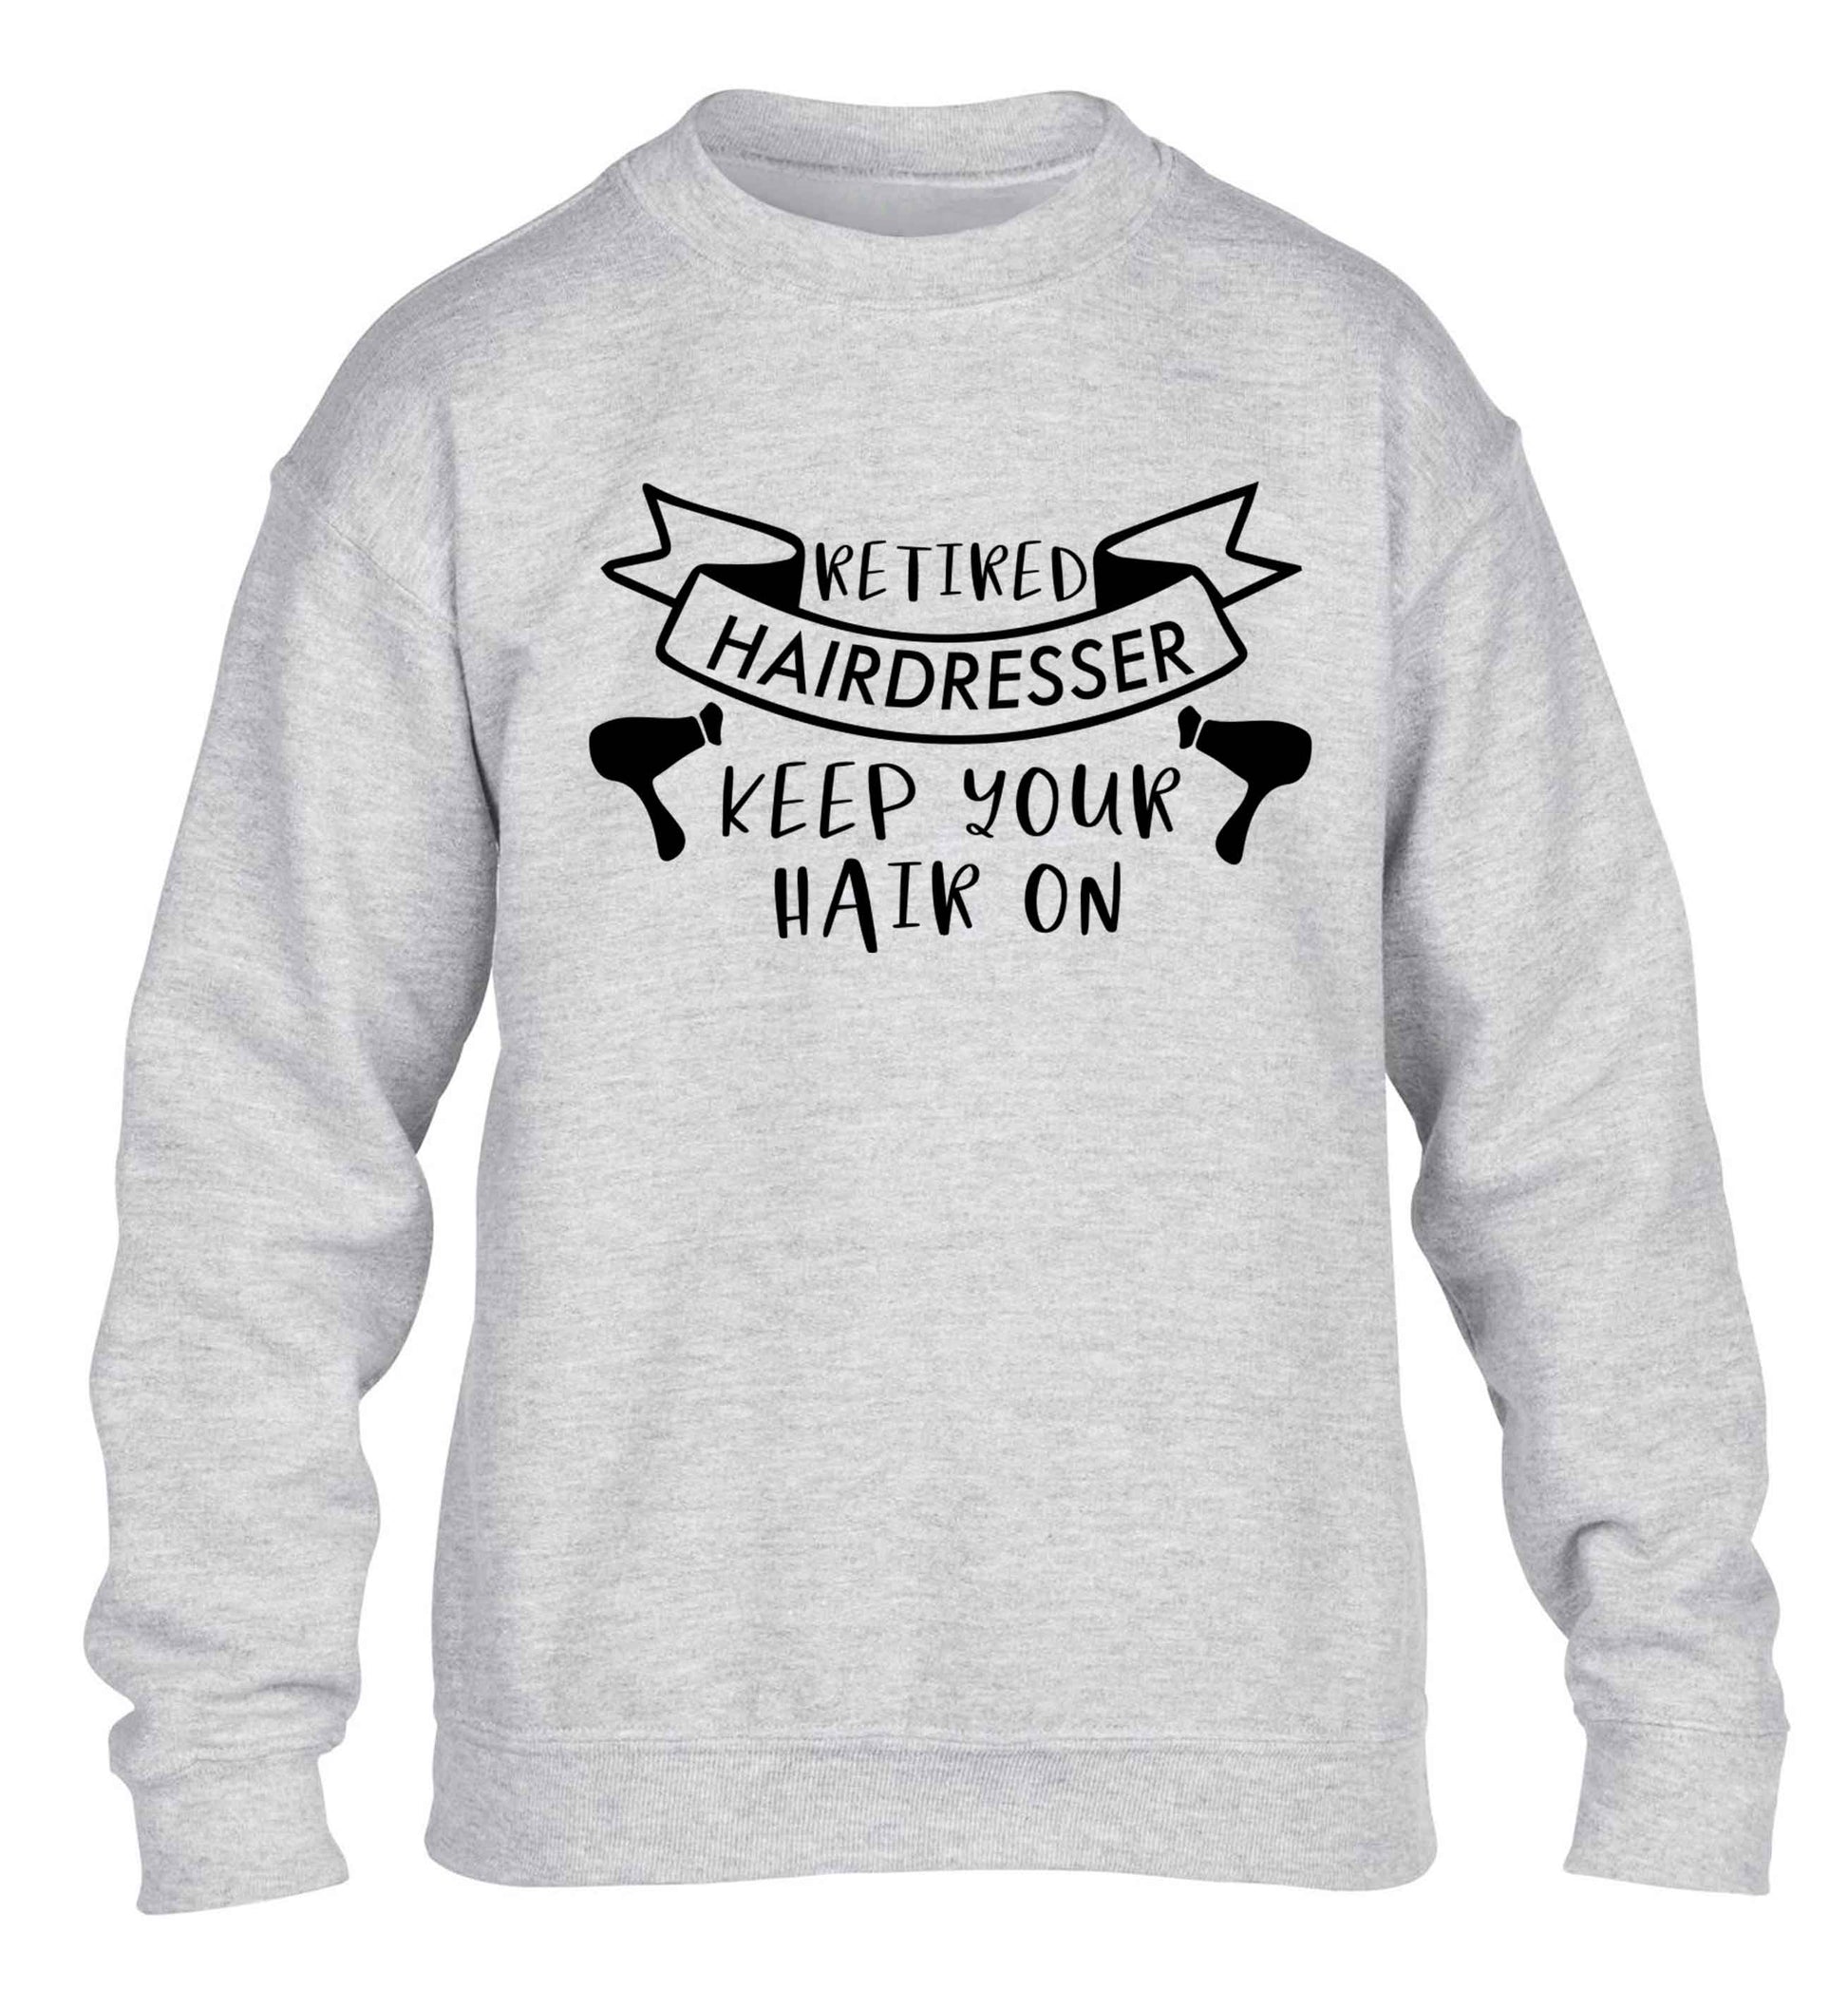 Retired hairdresser keep your hair on children's grey sweater 12-13 Years